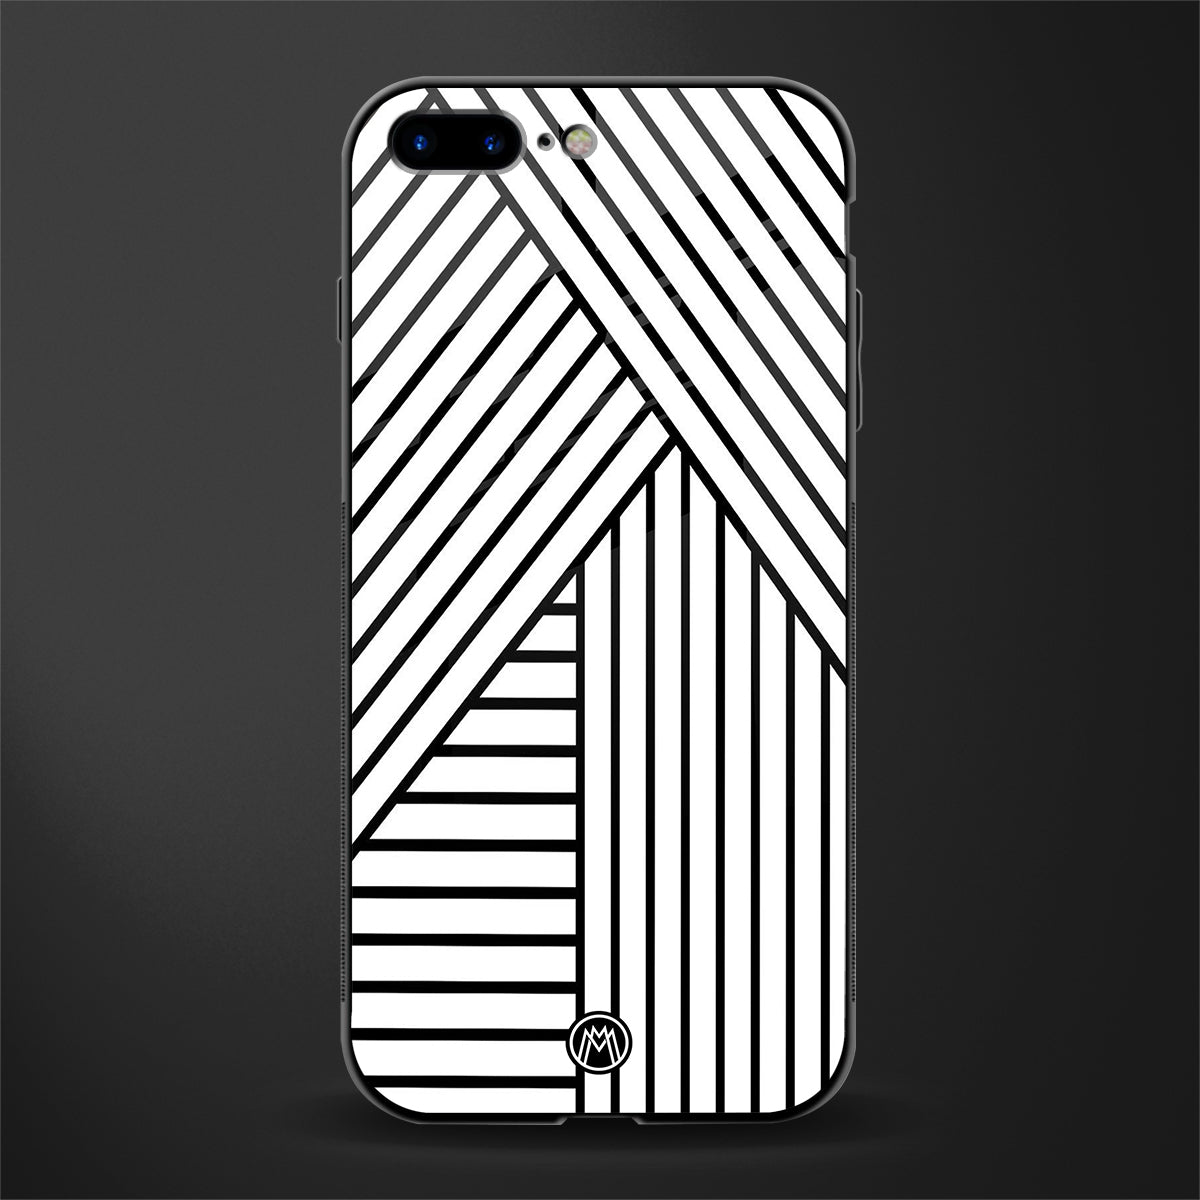 classic white black patten glass case for iphone 8 plus image